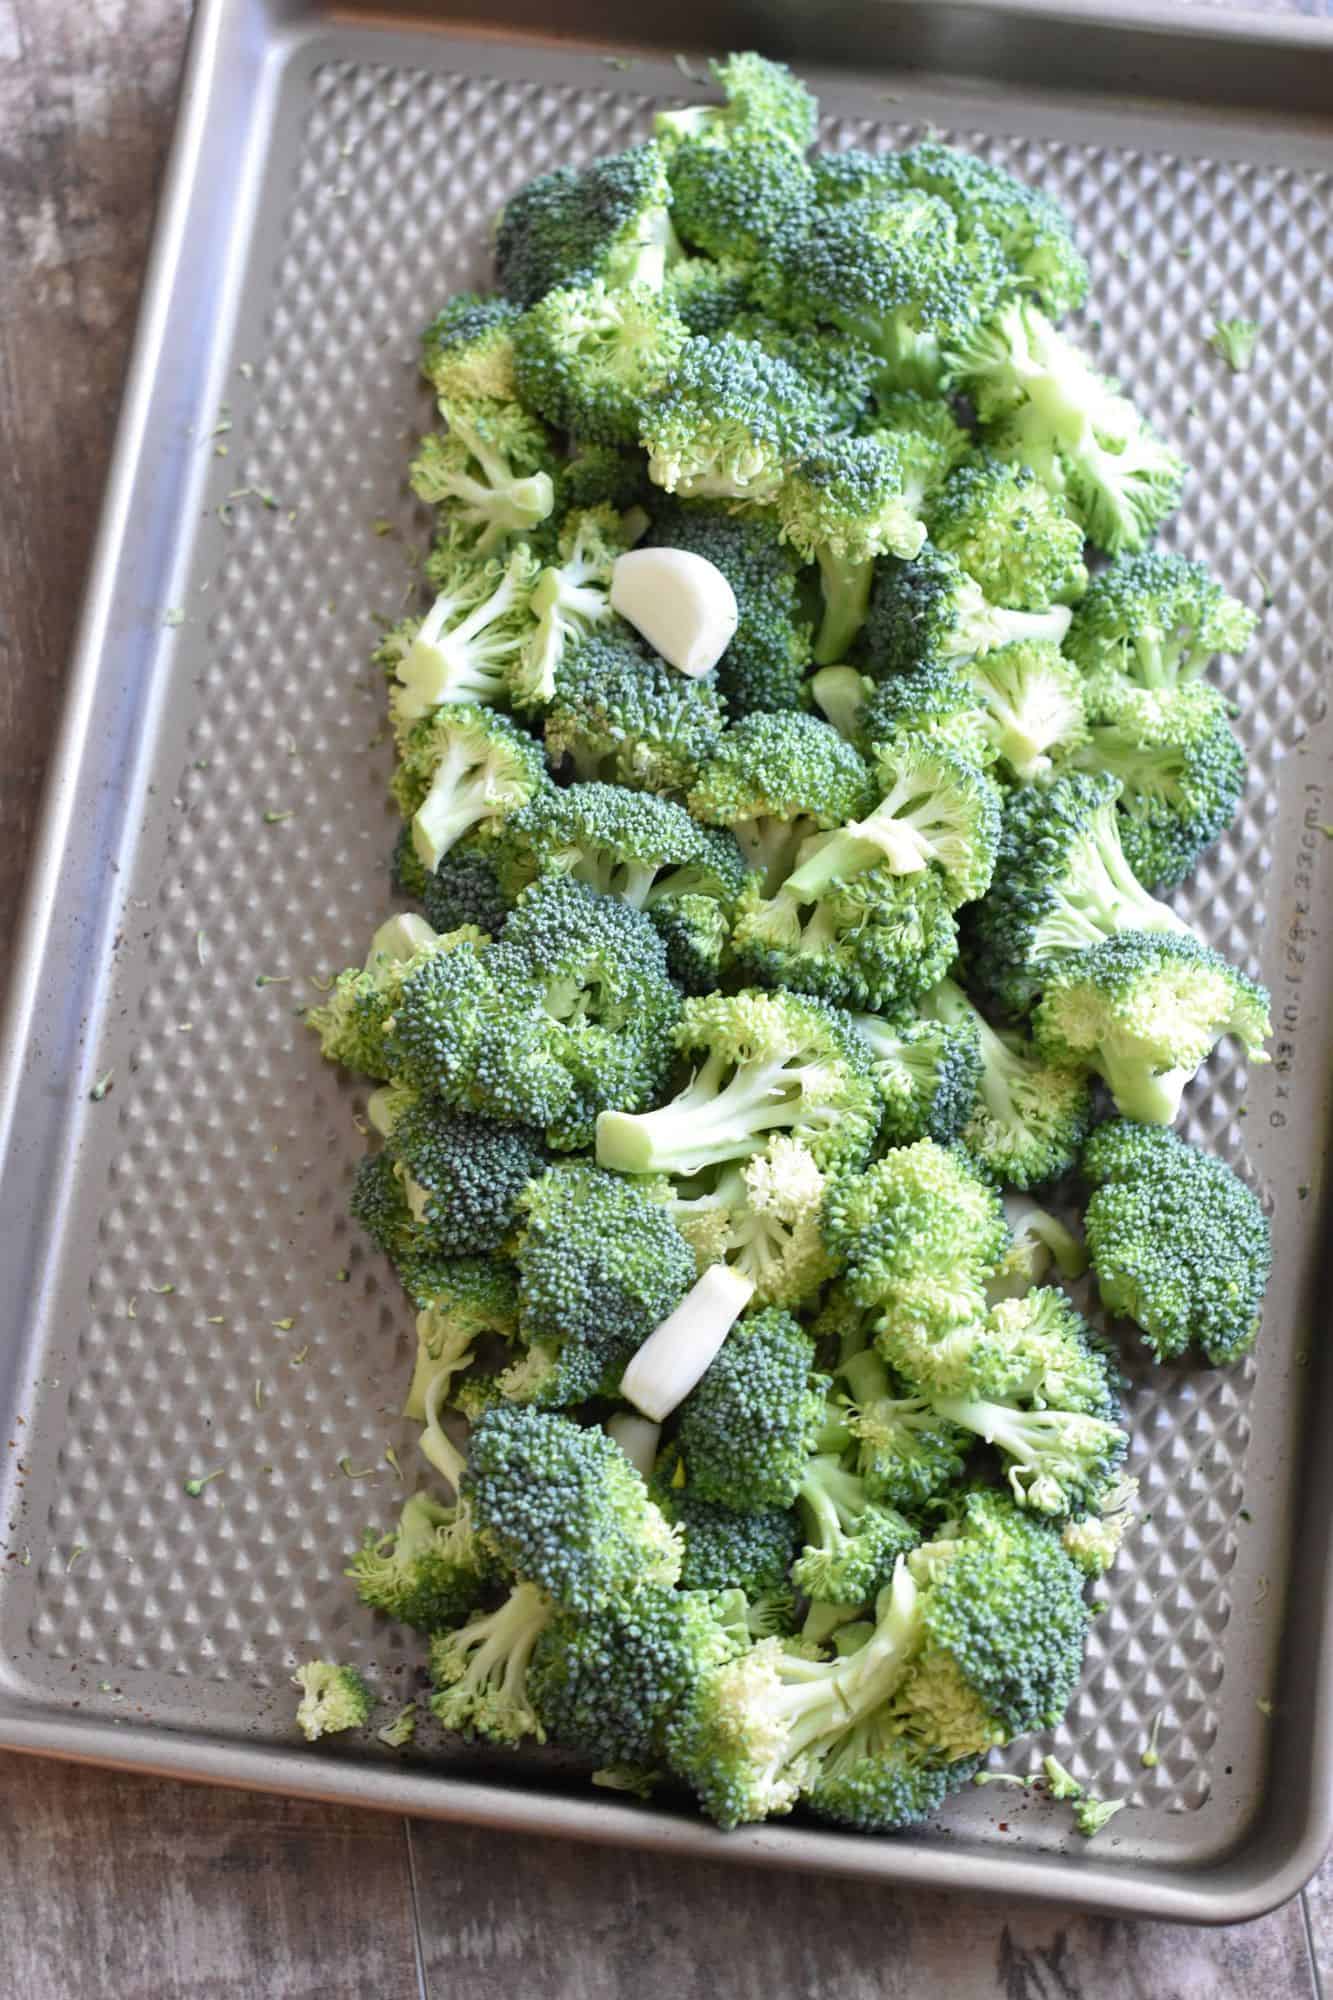 uncooked broccoli and garlic in pile on baking sheet